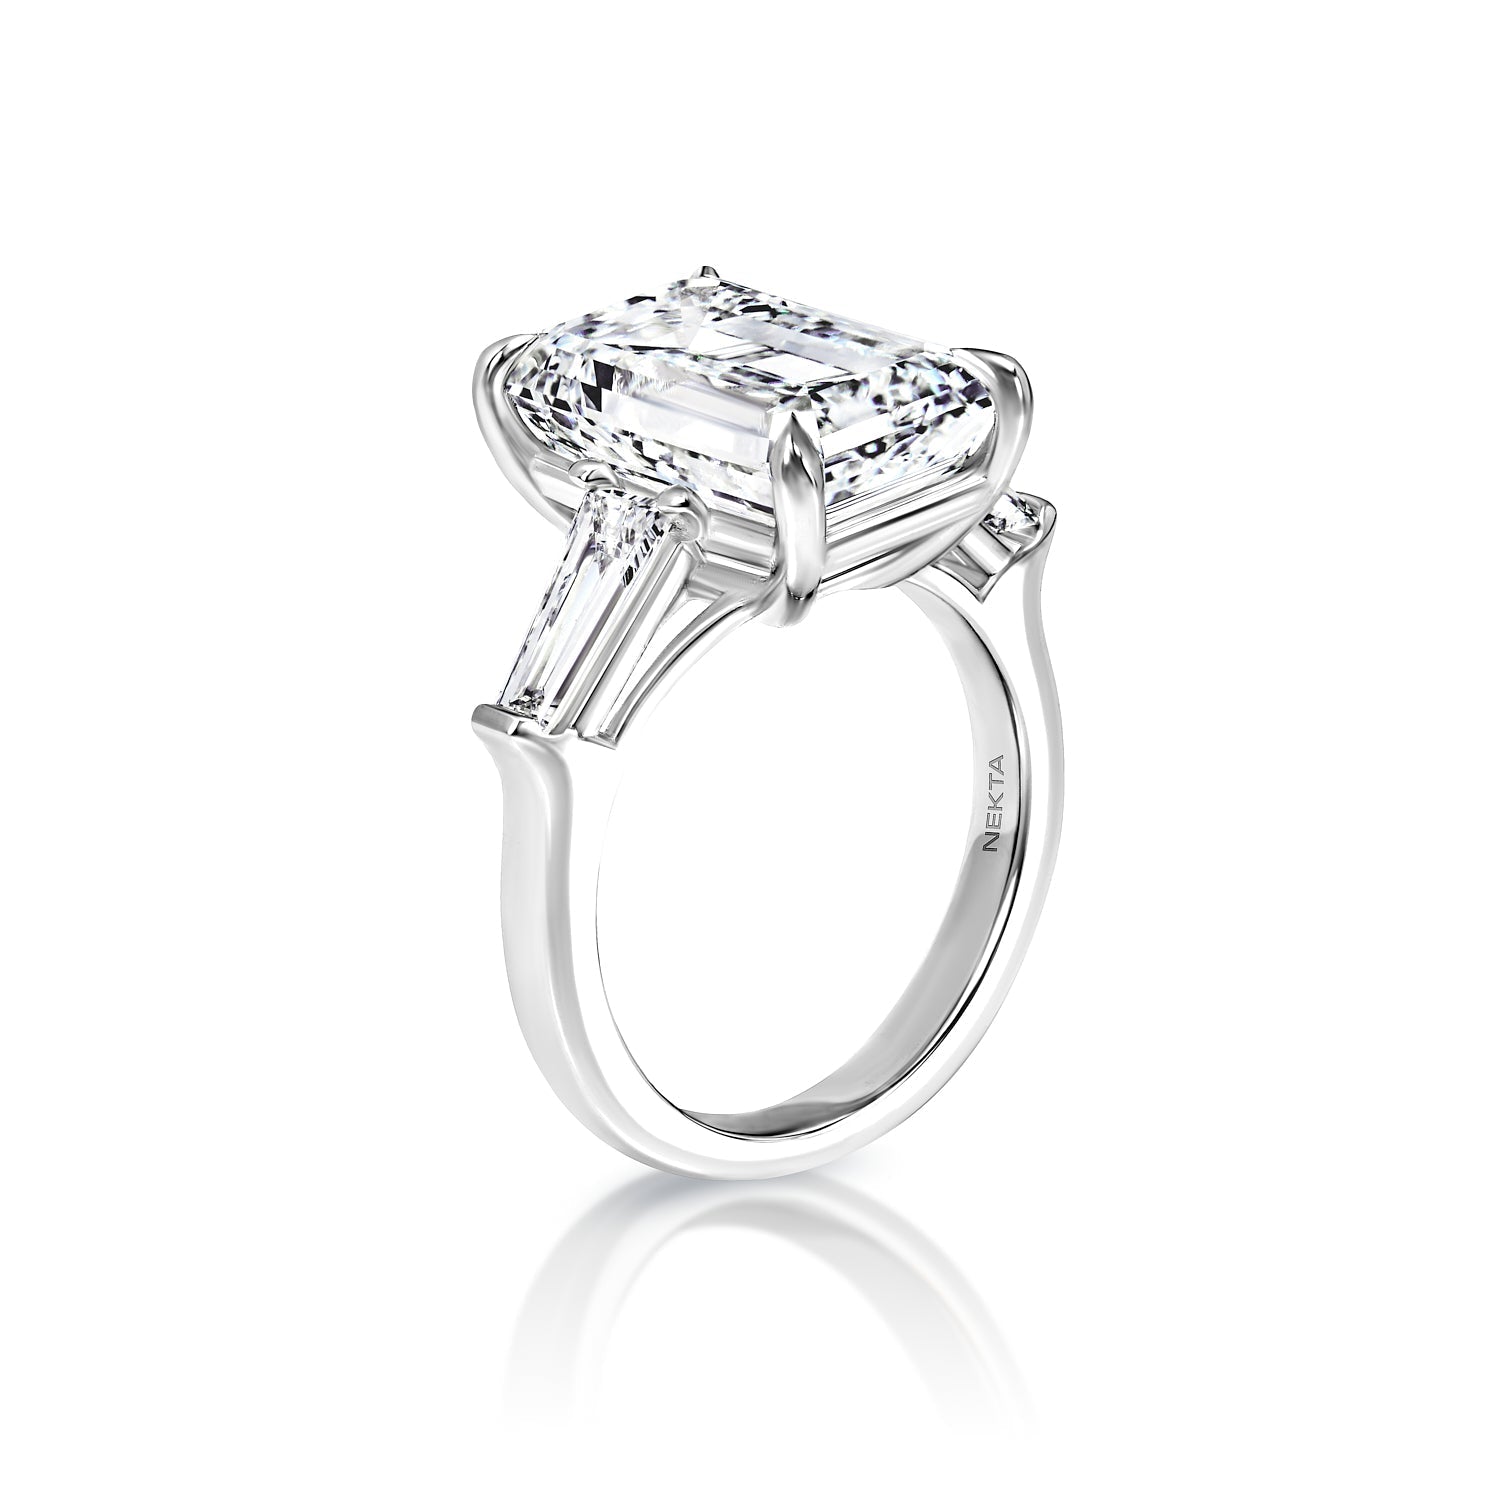 Lurleen 5 Carat F VS2 Emerald Cut Lab-Grown Diamond Engagement Ring in White Gold Side View